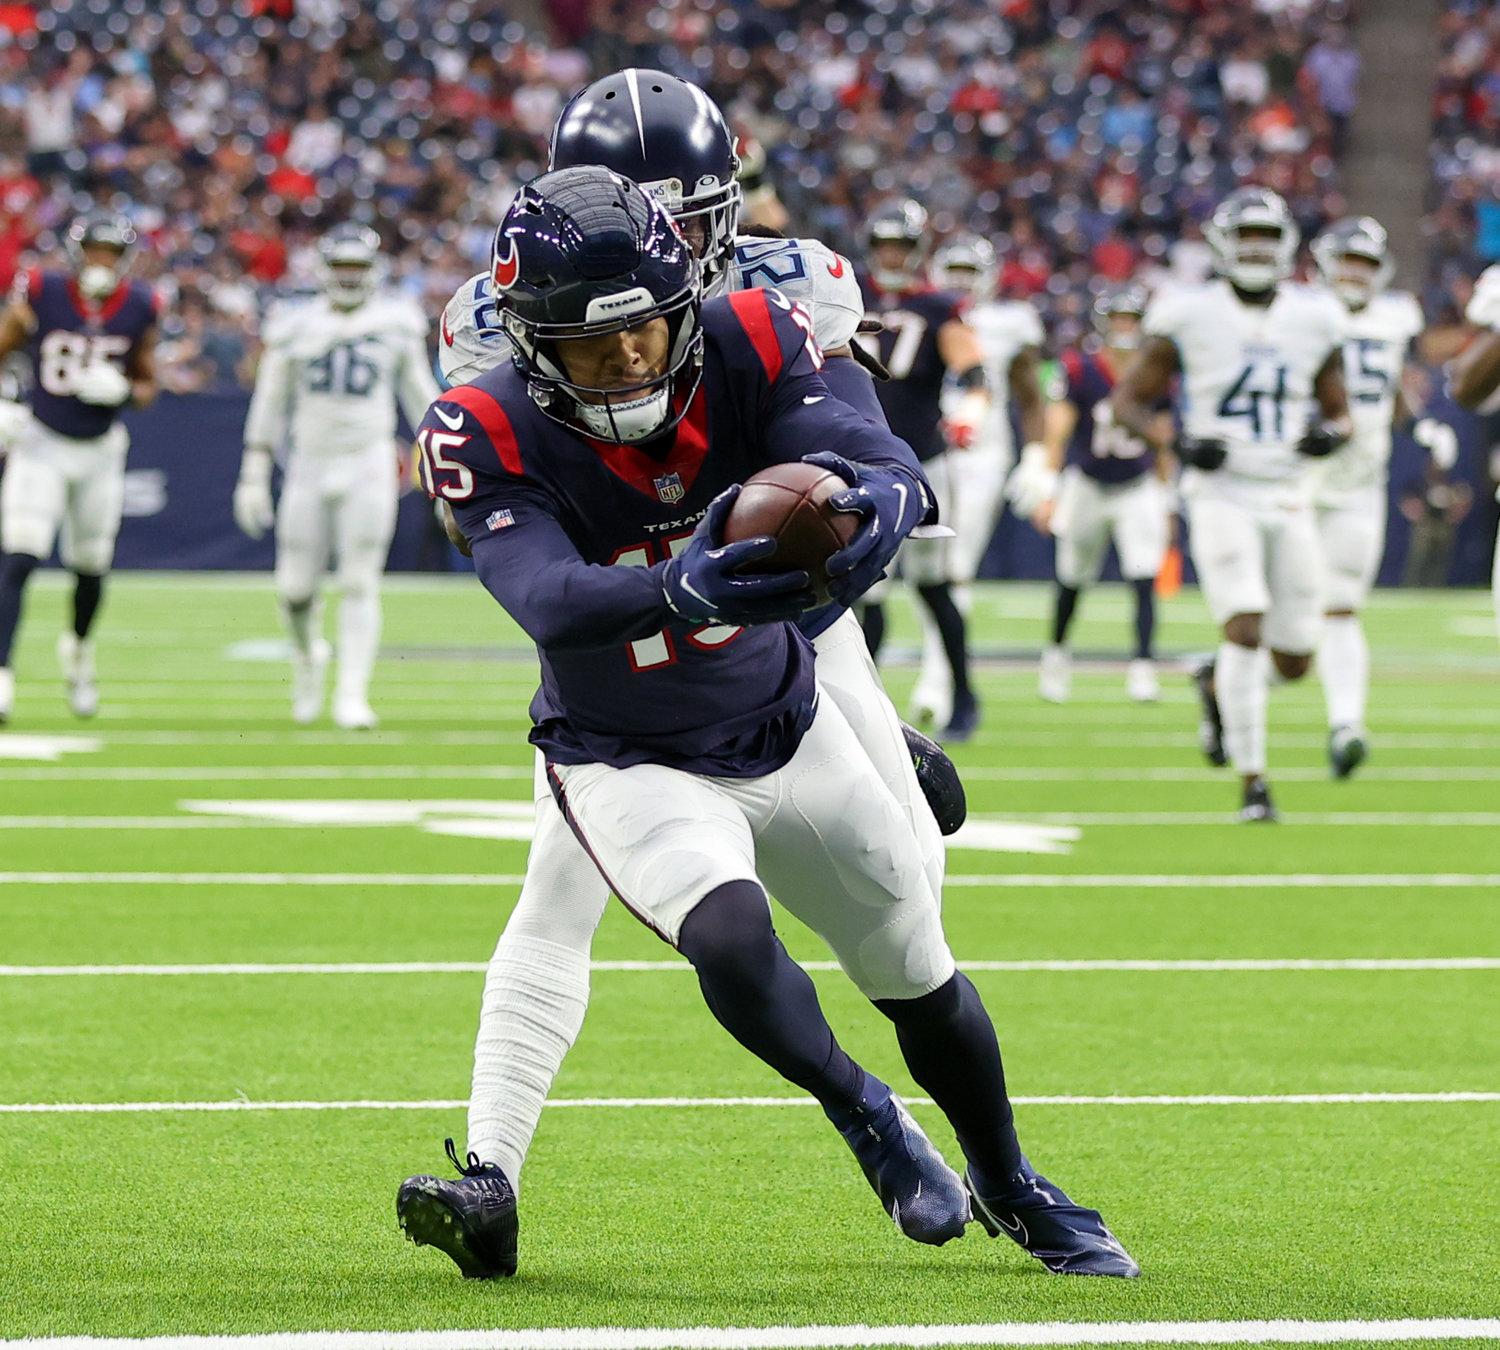 Houston Texans wide receiver Chris Moore (15) makes a 28-yard touchdown catch in the third quarter of an NFL game between the Texans and the Titans on Jan. 9, 2022 in Houston, Texas. The Titans won, 28-25.